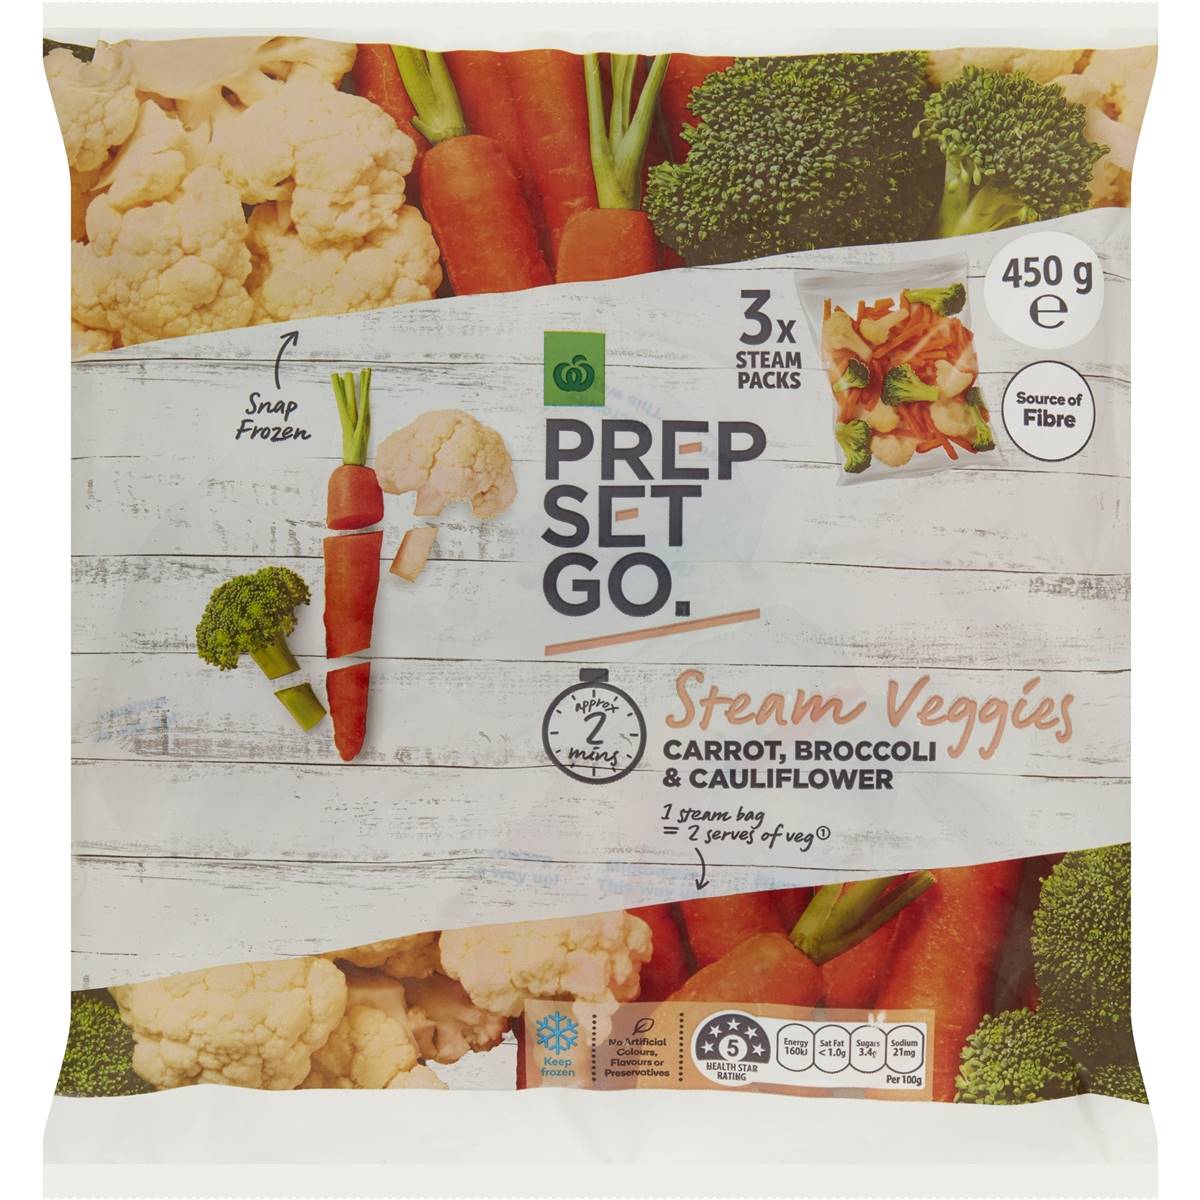 Calories in Woolworths Prep Set Go Frozen Steamed Carrot Broccoli & Cauliflower